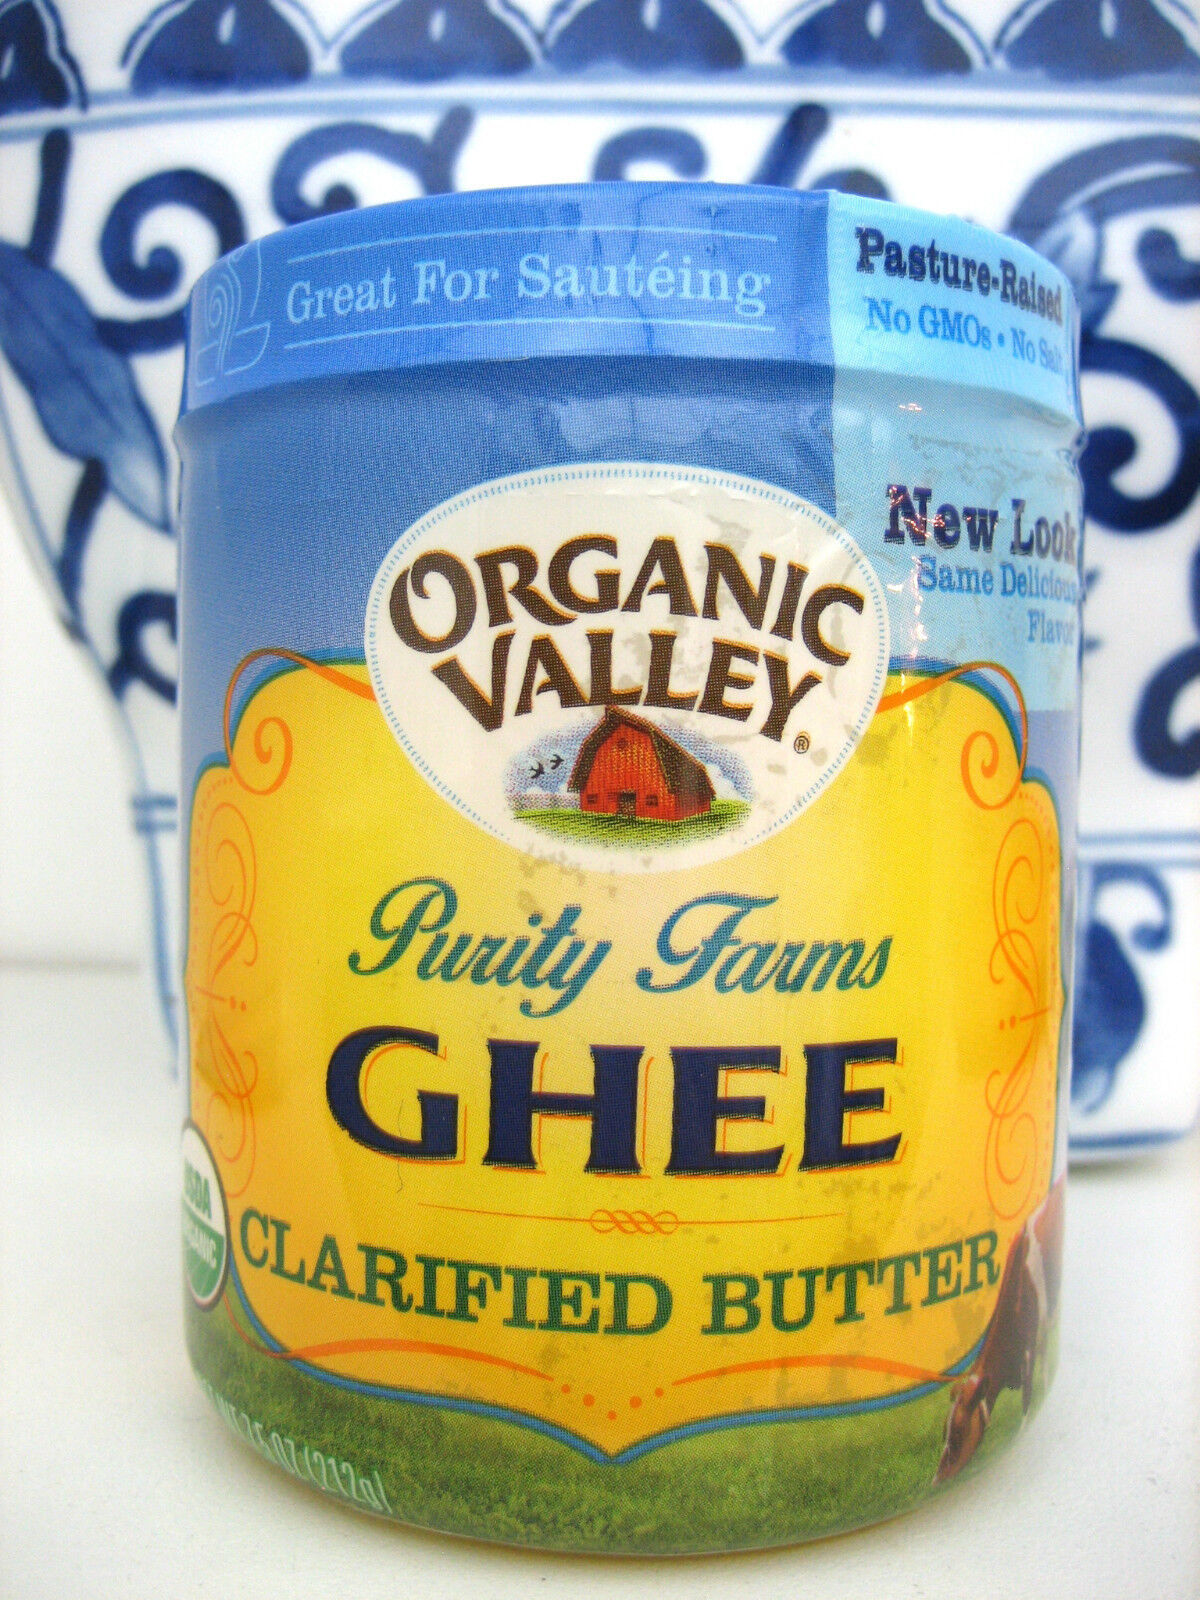 Purity Farms Organic Valley Ghee Clarified Butter, 7.5 oz - $17.32